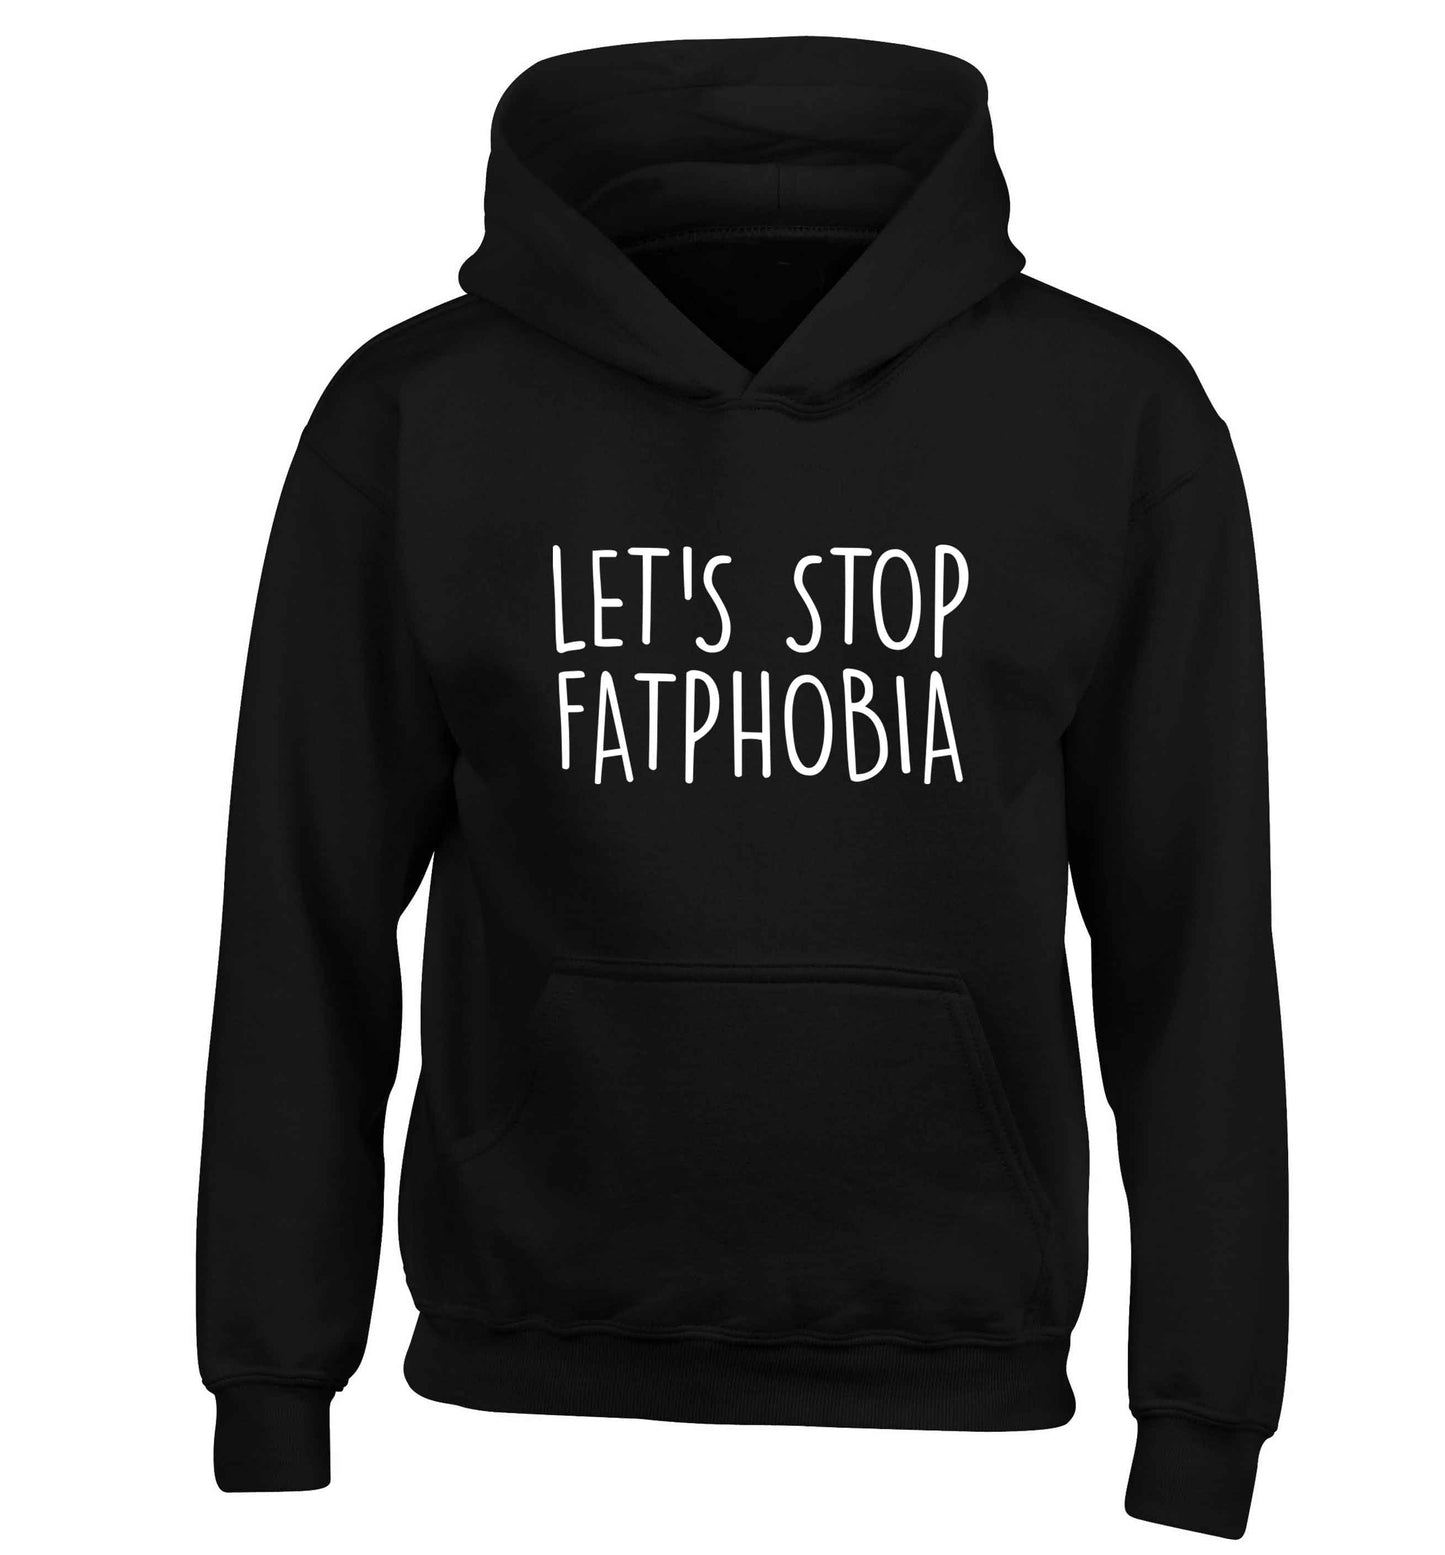 Let's stop fatphobia children's black hoodie 12-13 Years